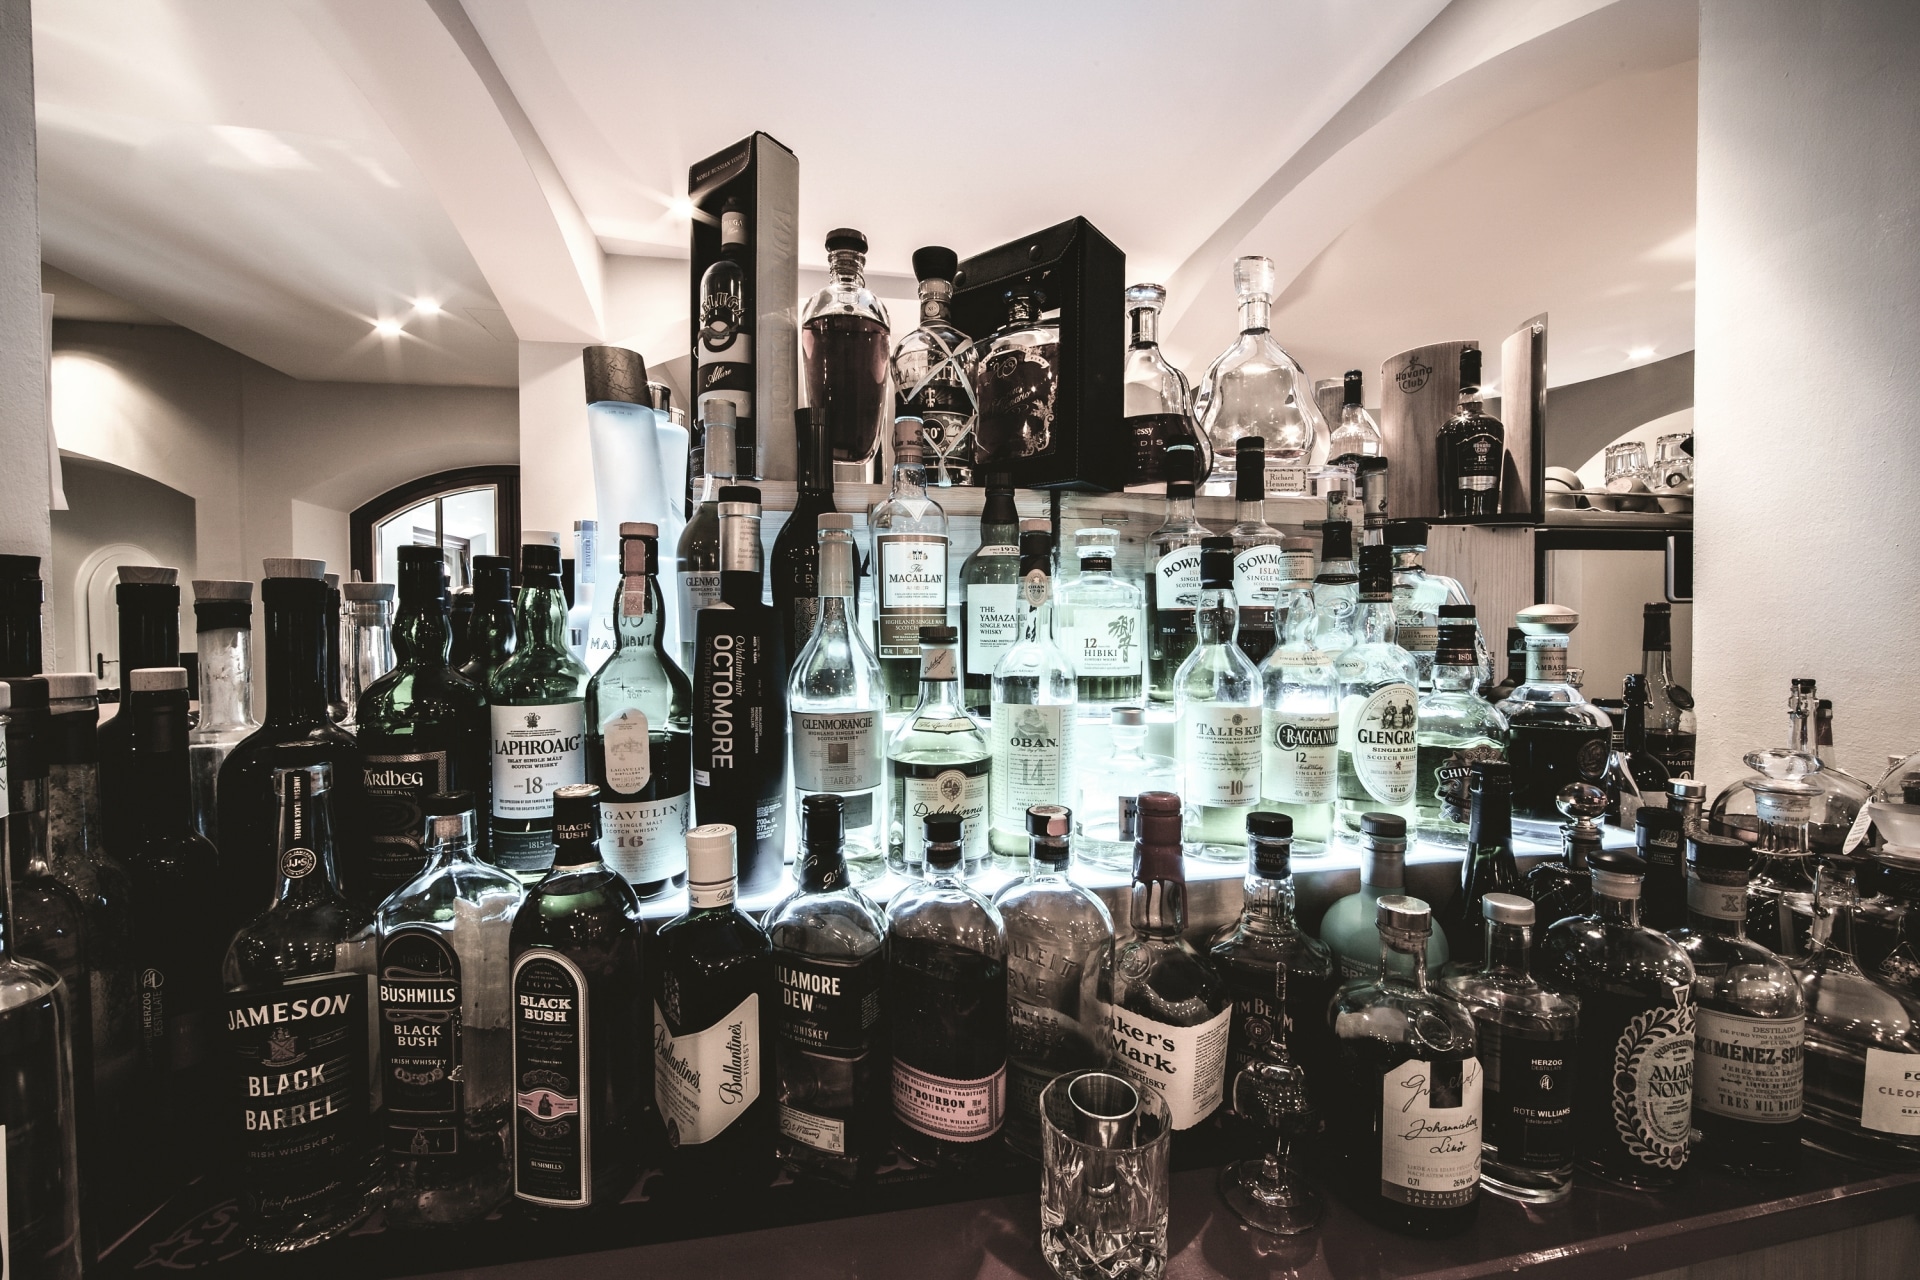 An assortment of spirits and liquor bottles on a bar shelf, showcasing a variety of brands and types of alcohol.